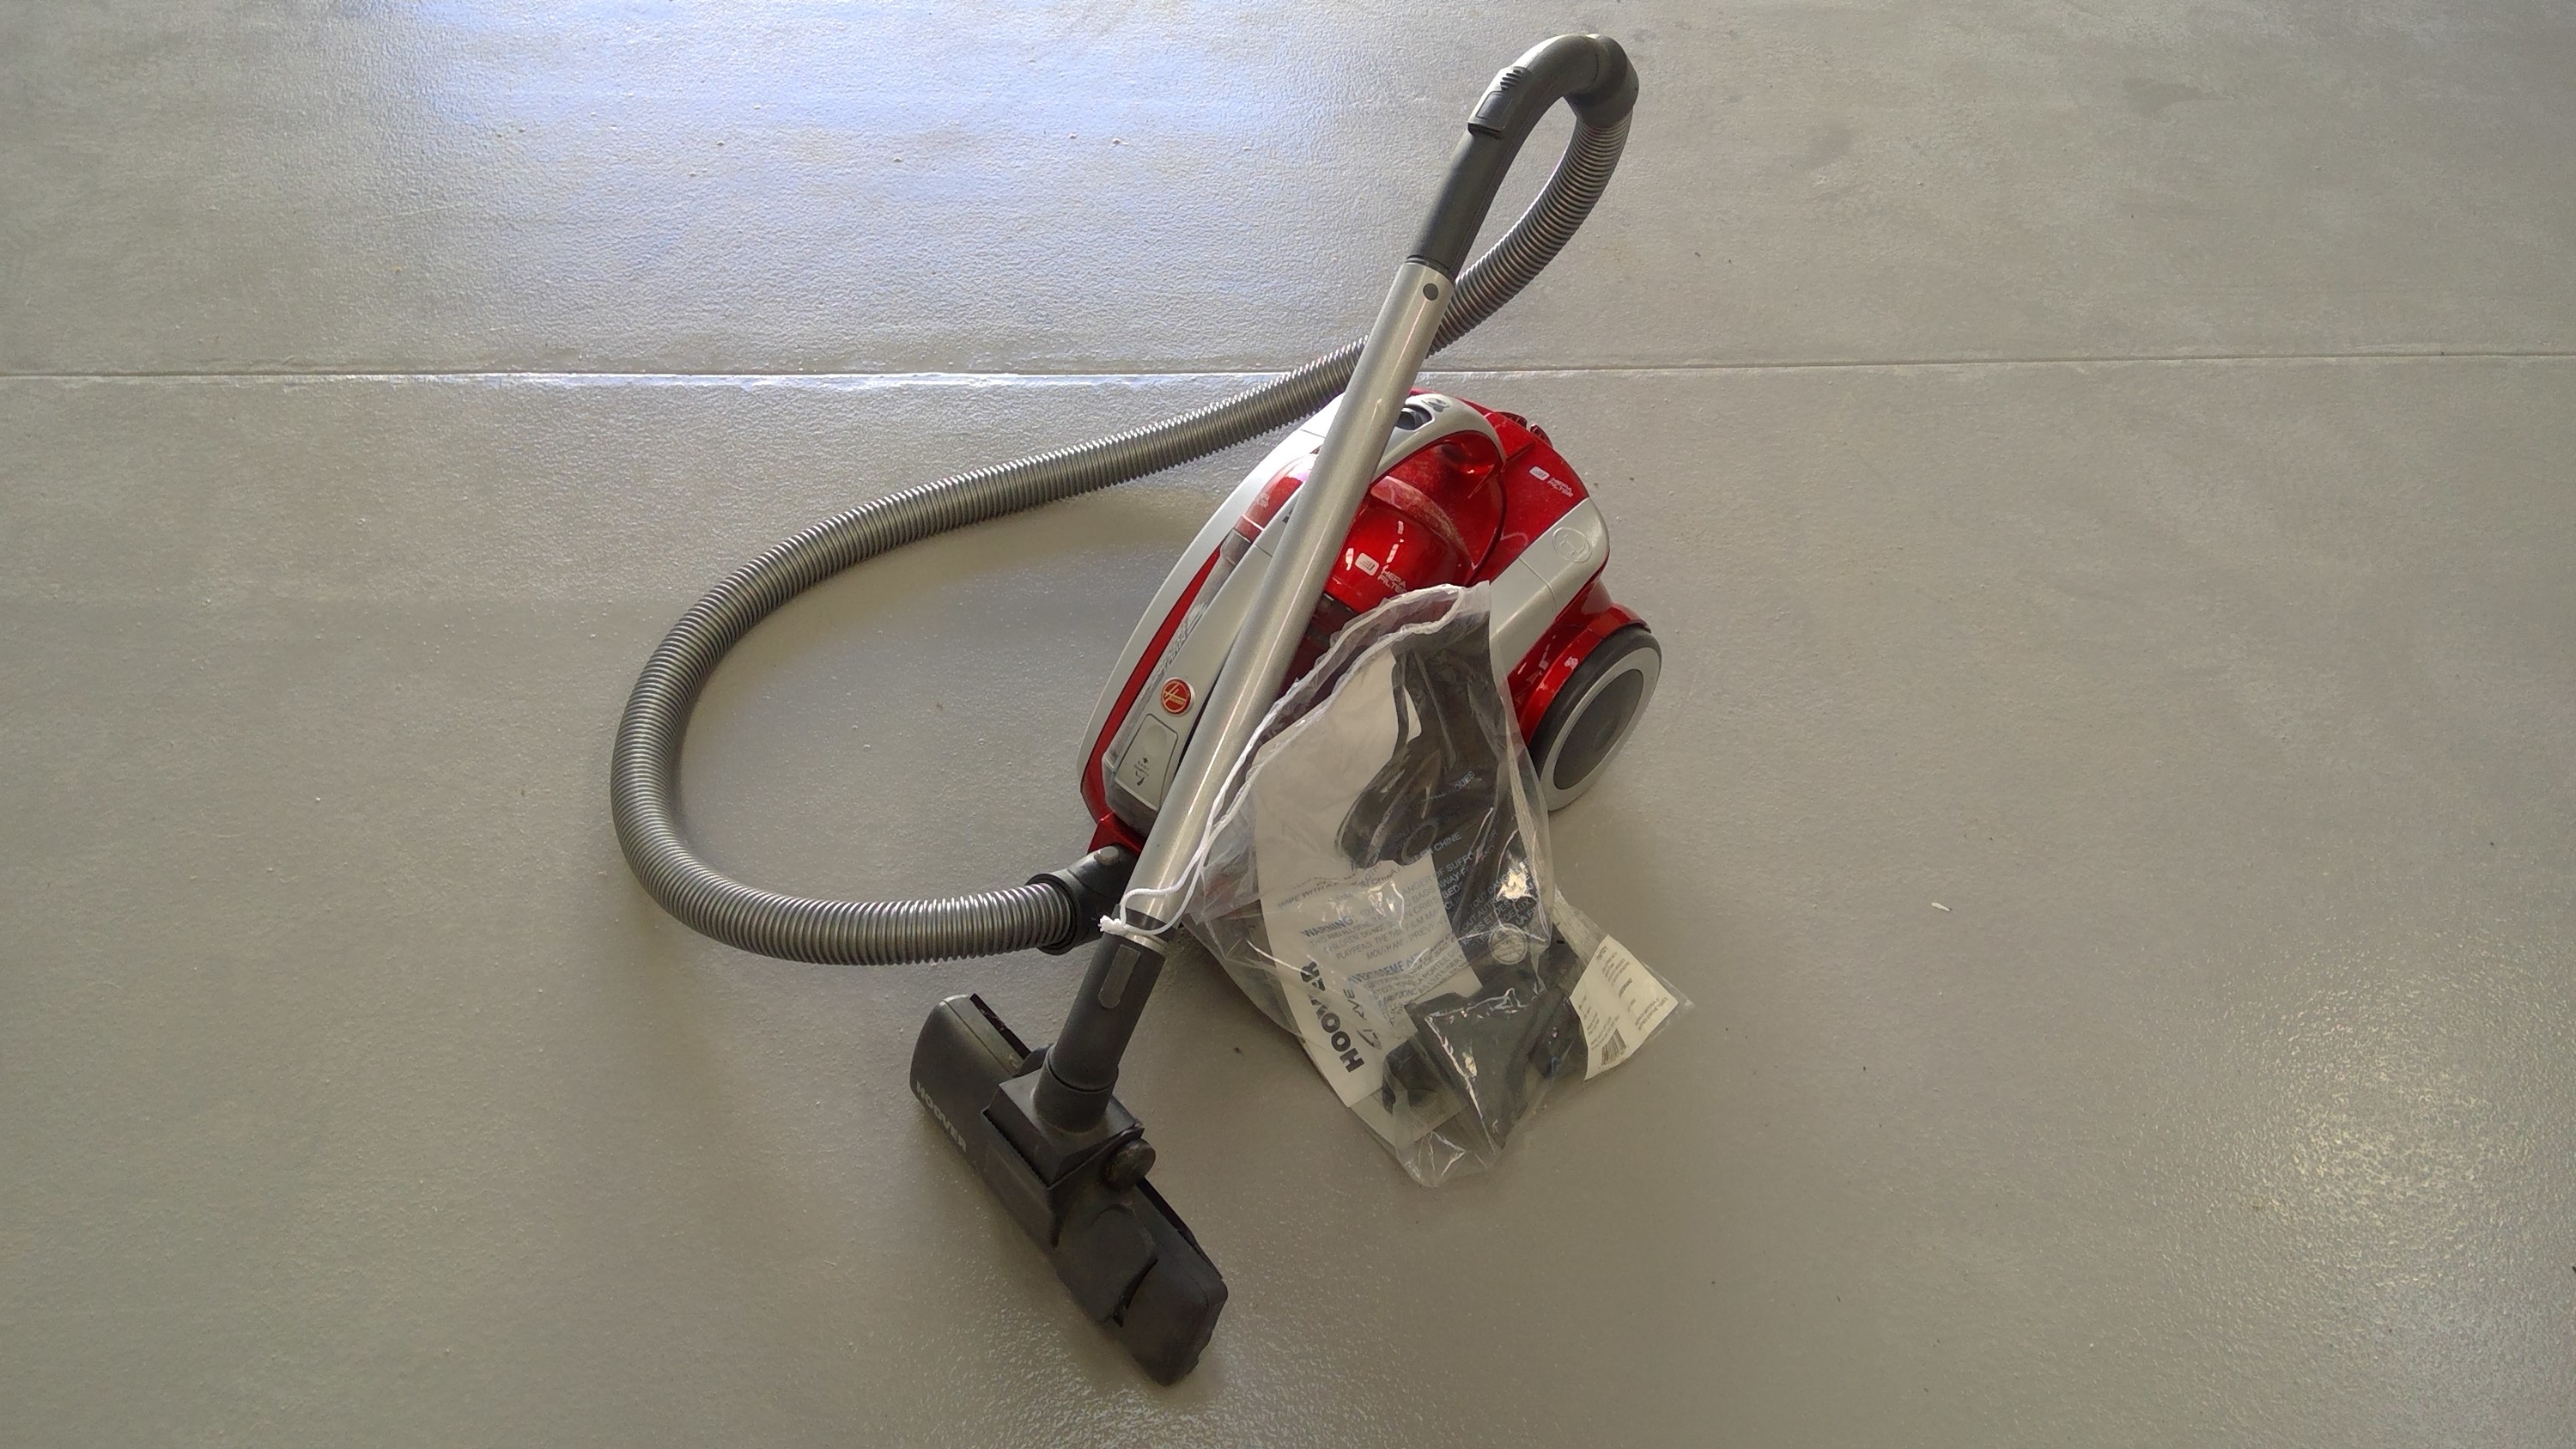 A "Curve" Hoover with accessories.